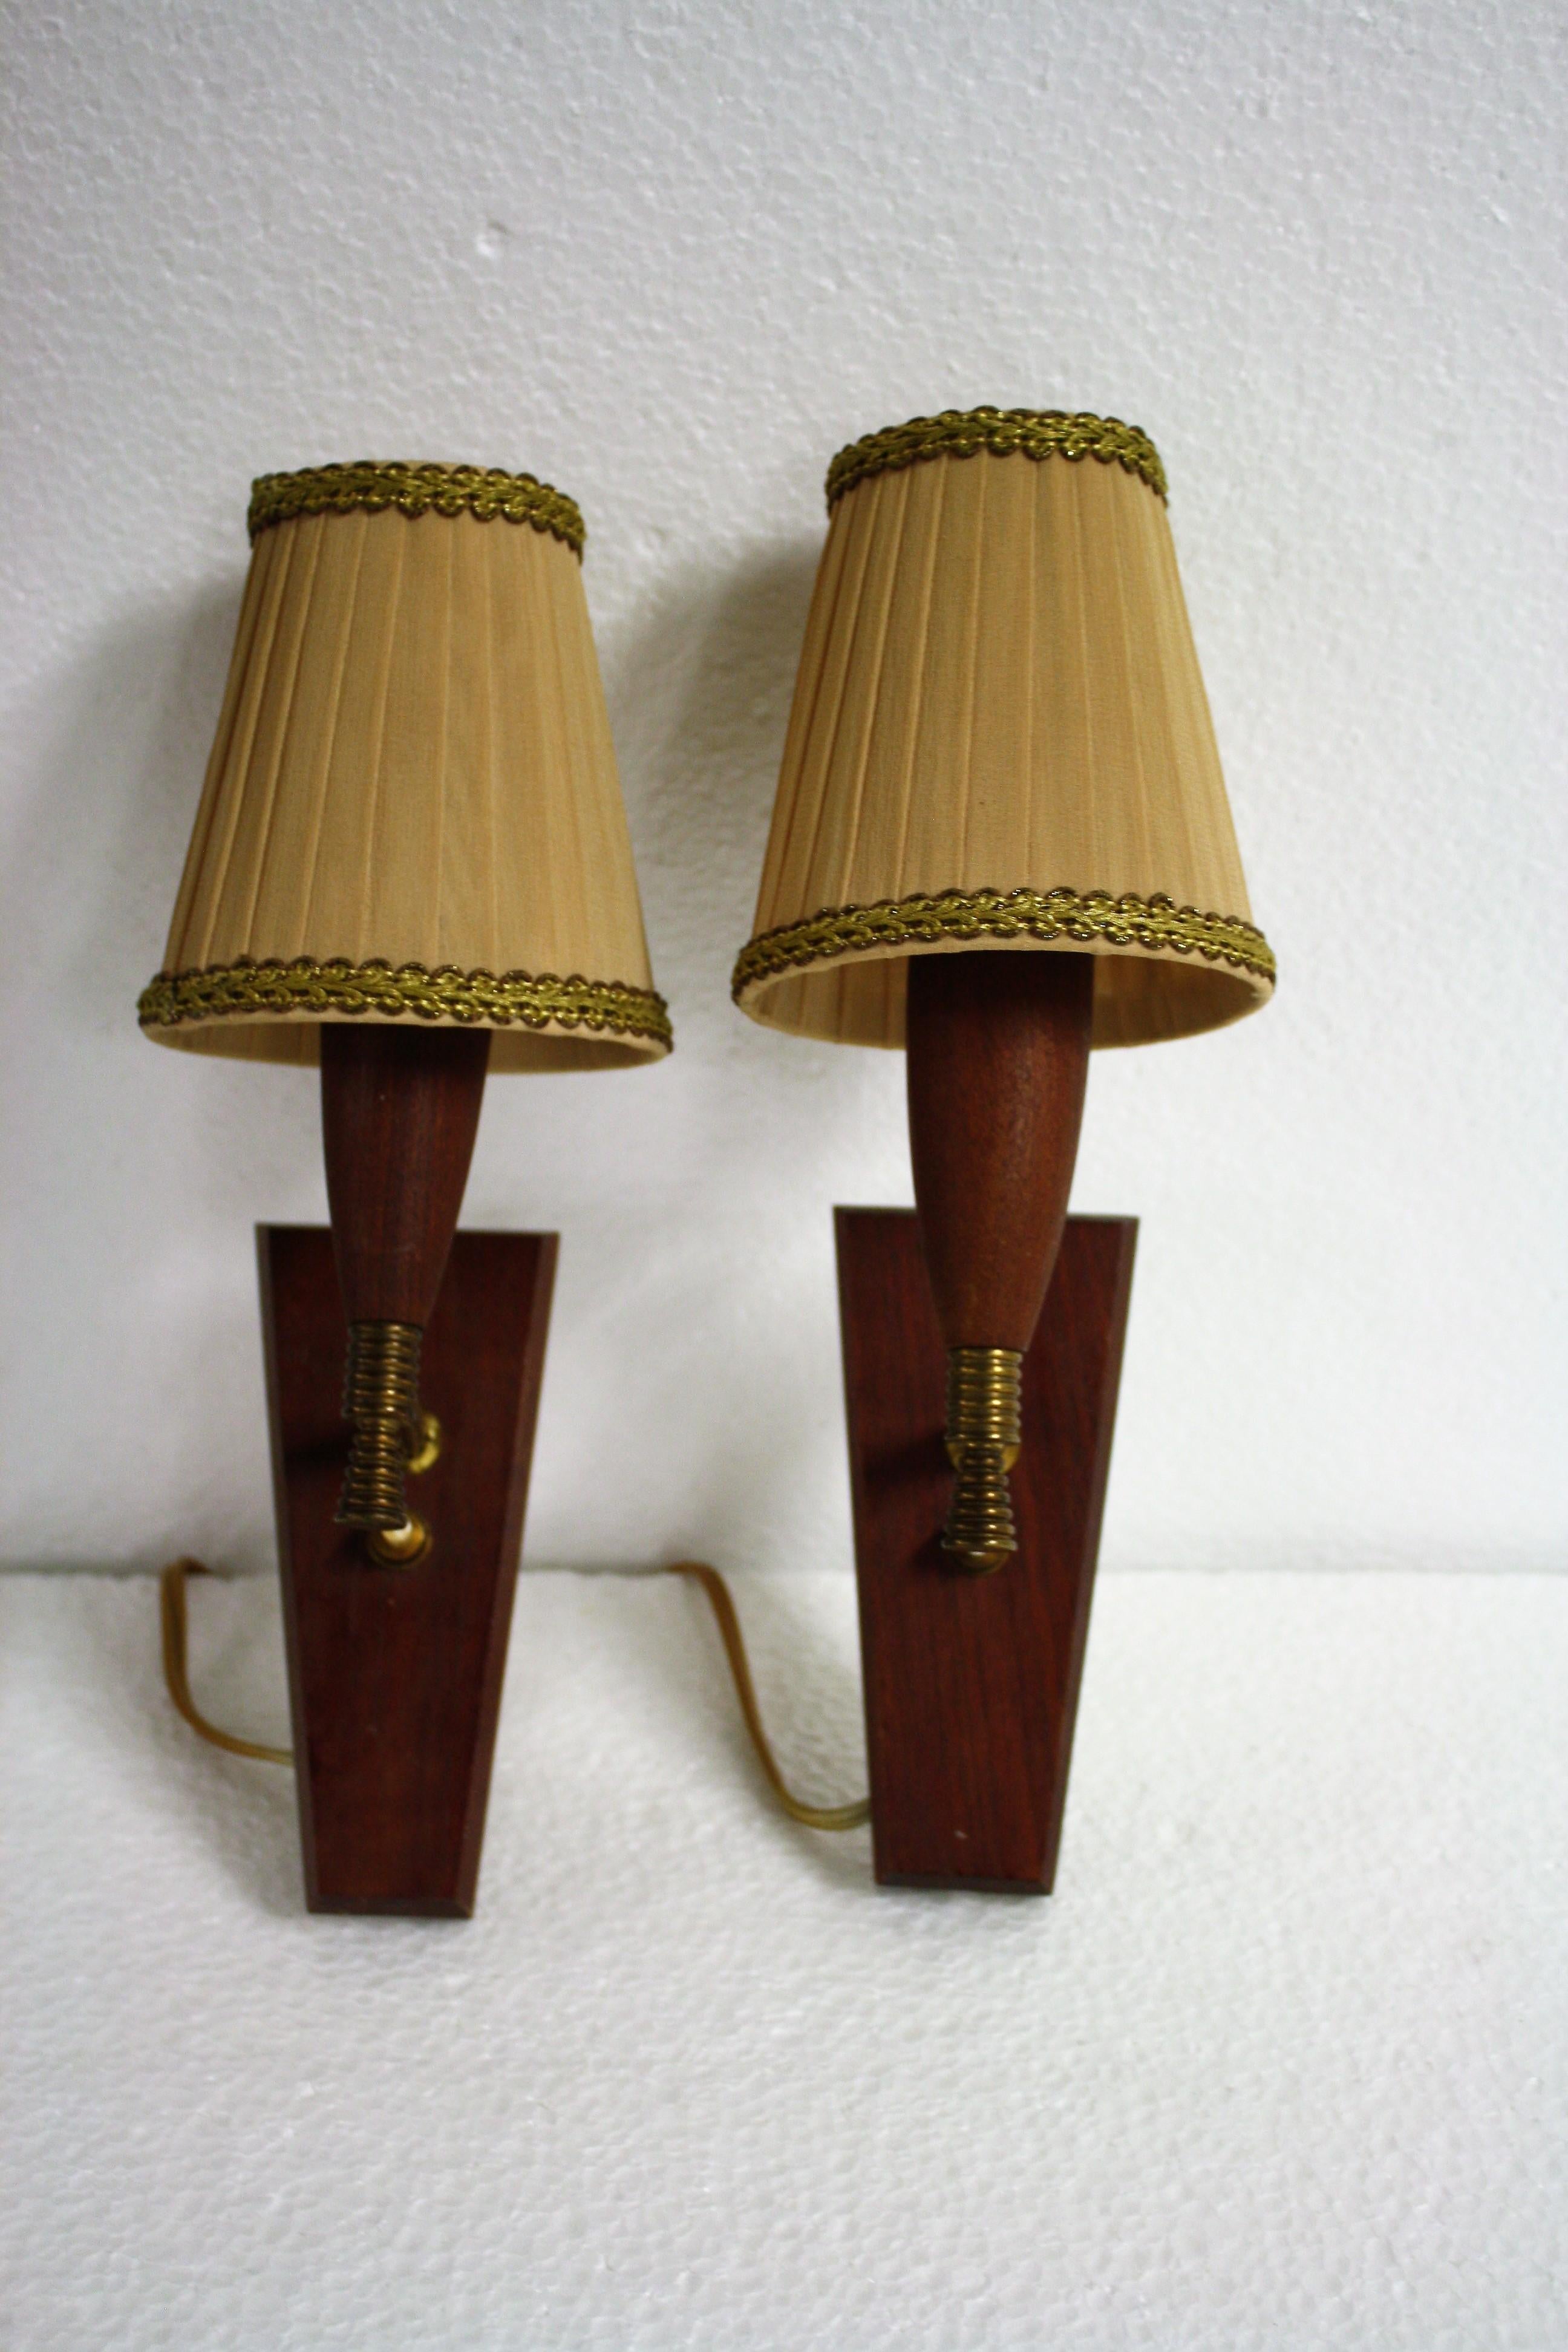 Classic and finely manufactured brass and teak wooden candle light sconces.

These lovely wall lights come with their original clip on lamp shades. But in a more modern day interior they'd look just fine without them.

Very good condition with